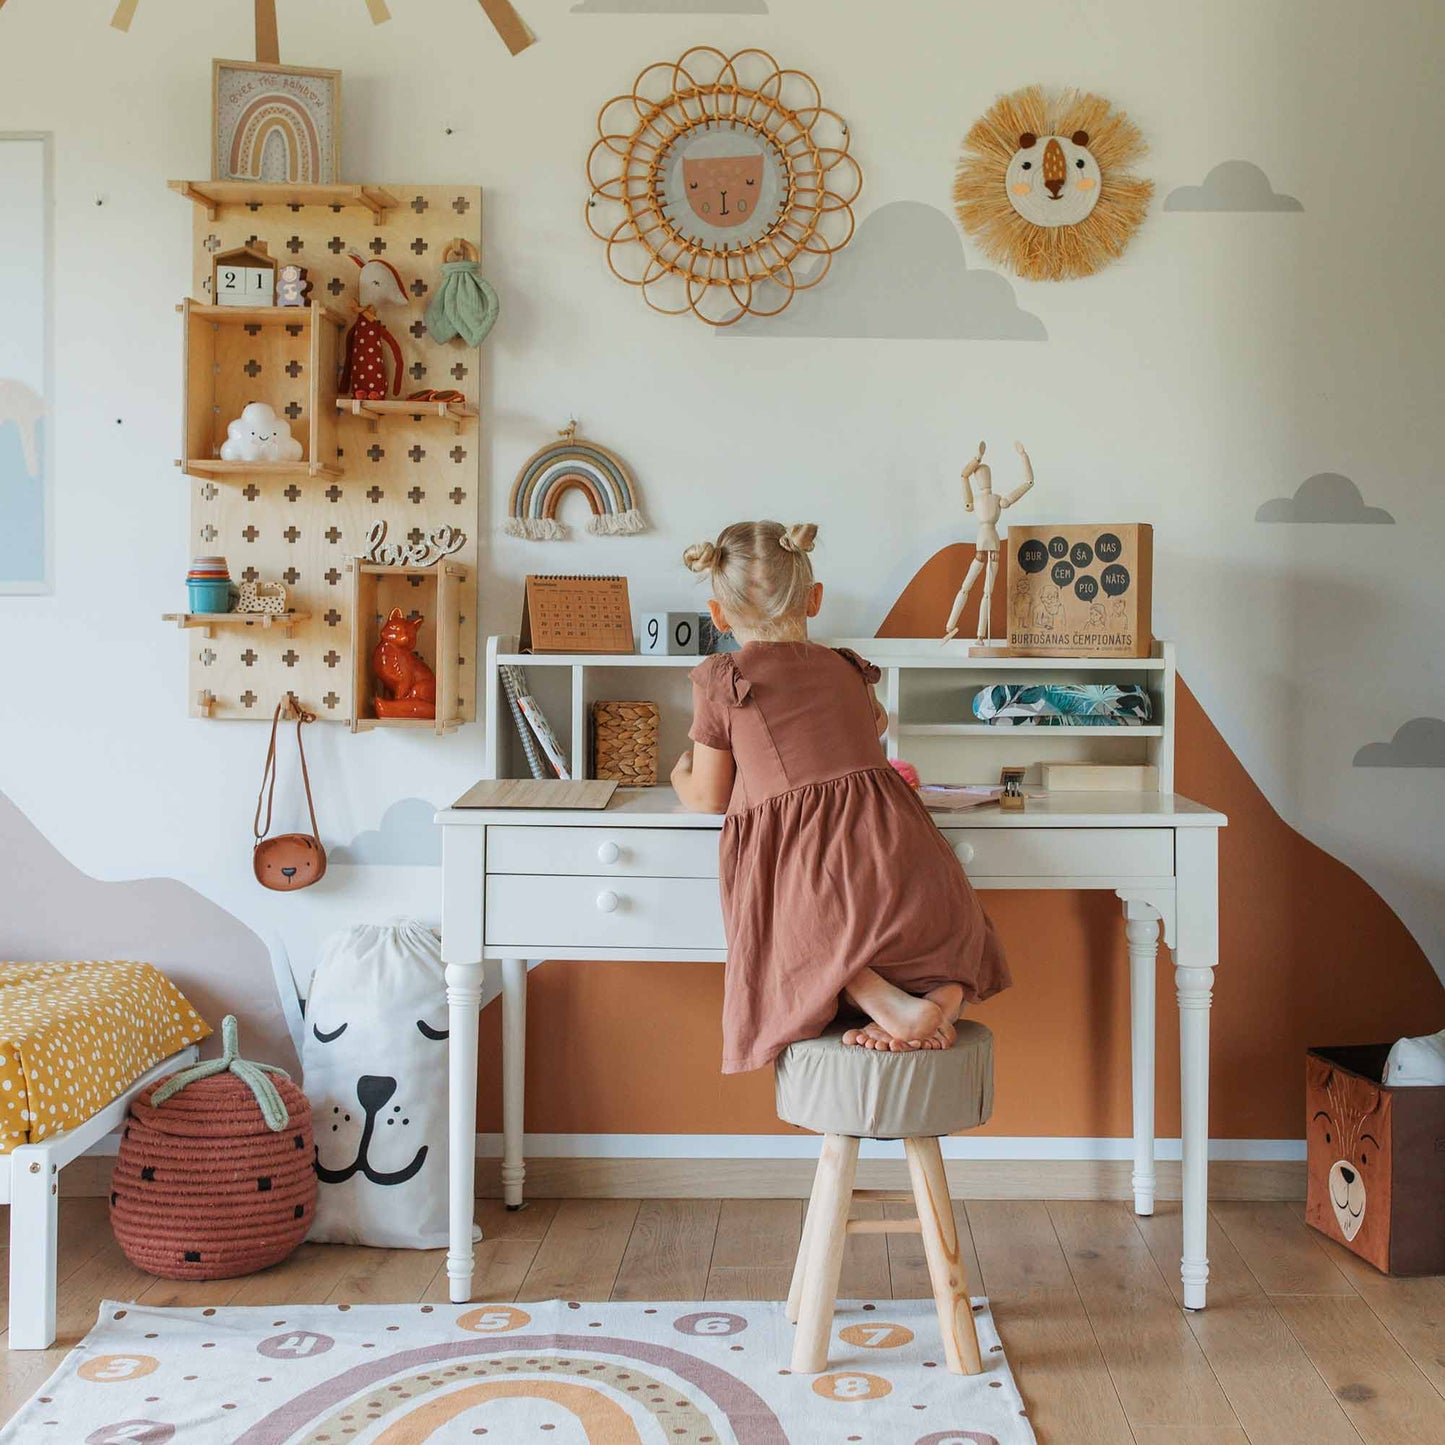 A young child stands on a stool, reaching for objects on a versatile Table with a Hutch in a decorated room with shelves, a wall clock, and various items like bags, toys, and rainbow-themed decor. The desk's cable management and storage options keep everything neat and organized.